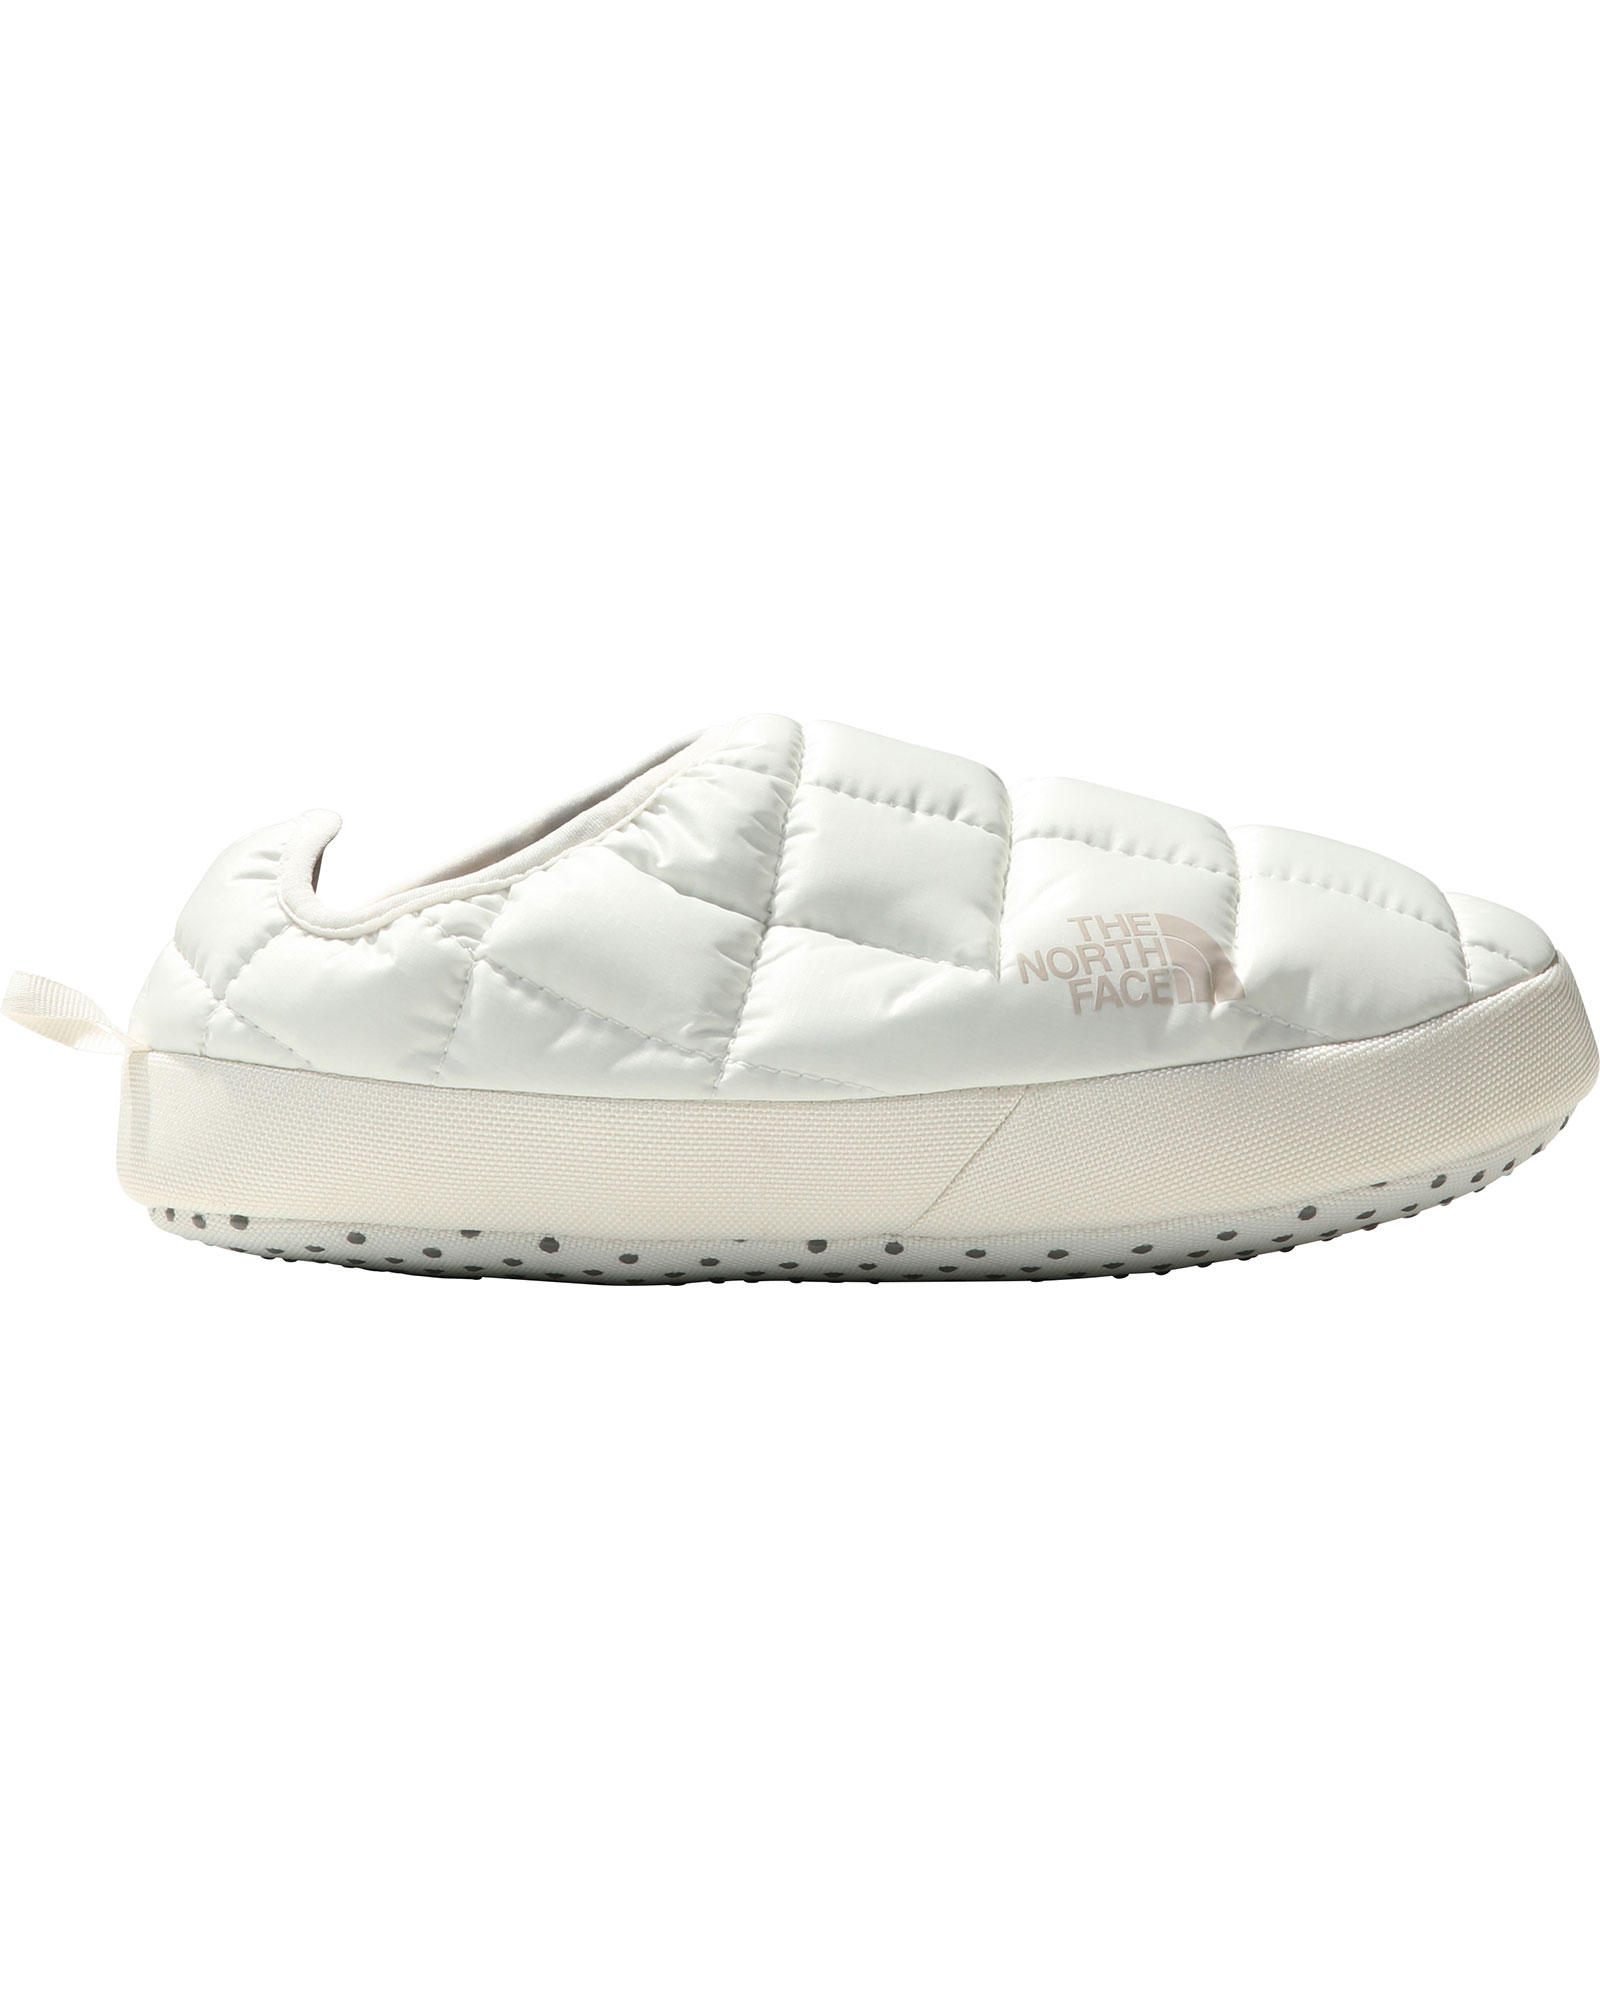 The North Face Women’s ThermoBall V Mules - Gardenia White/Silver Grey S